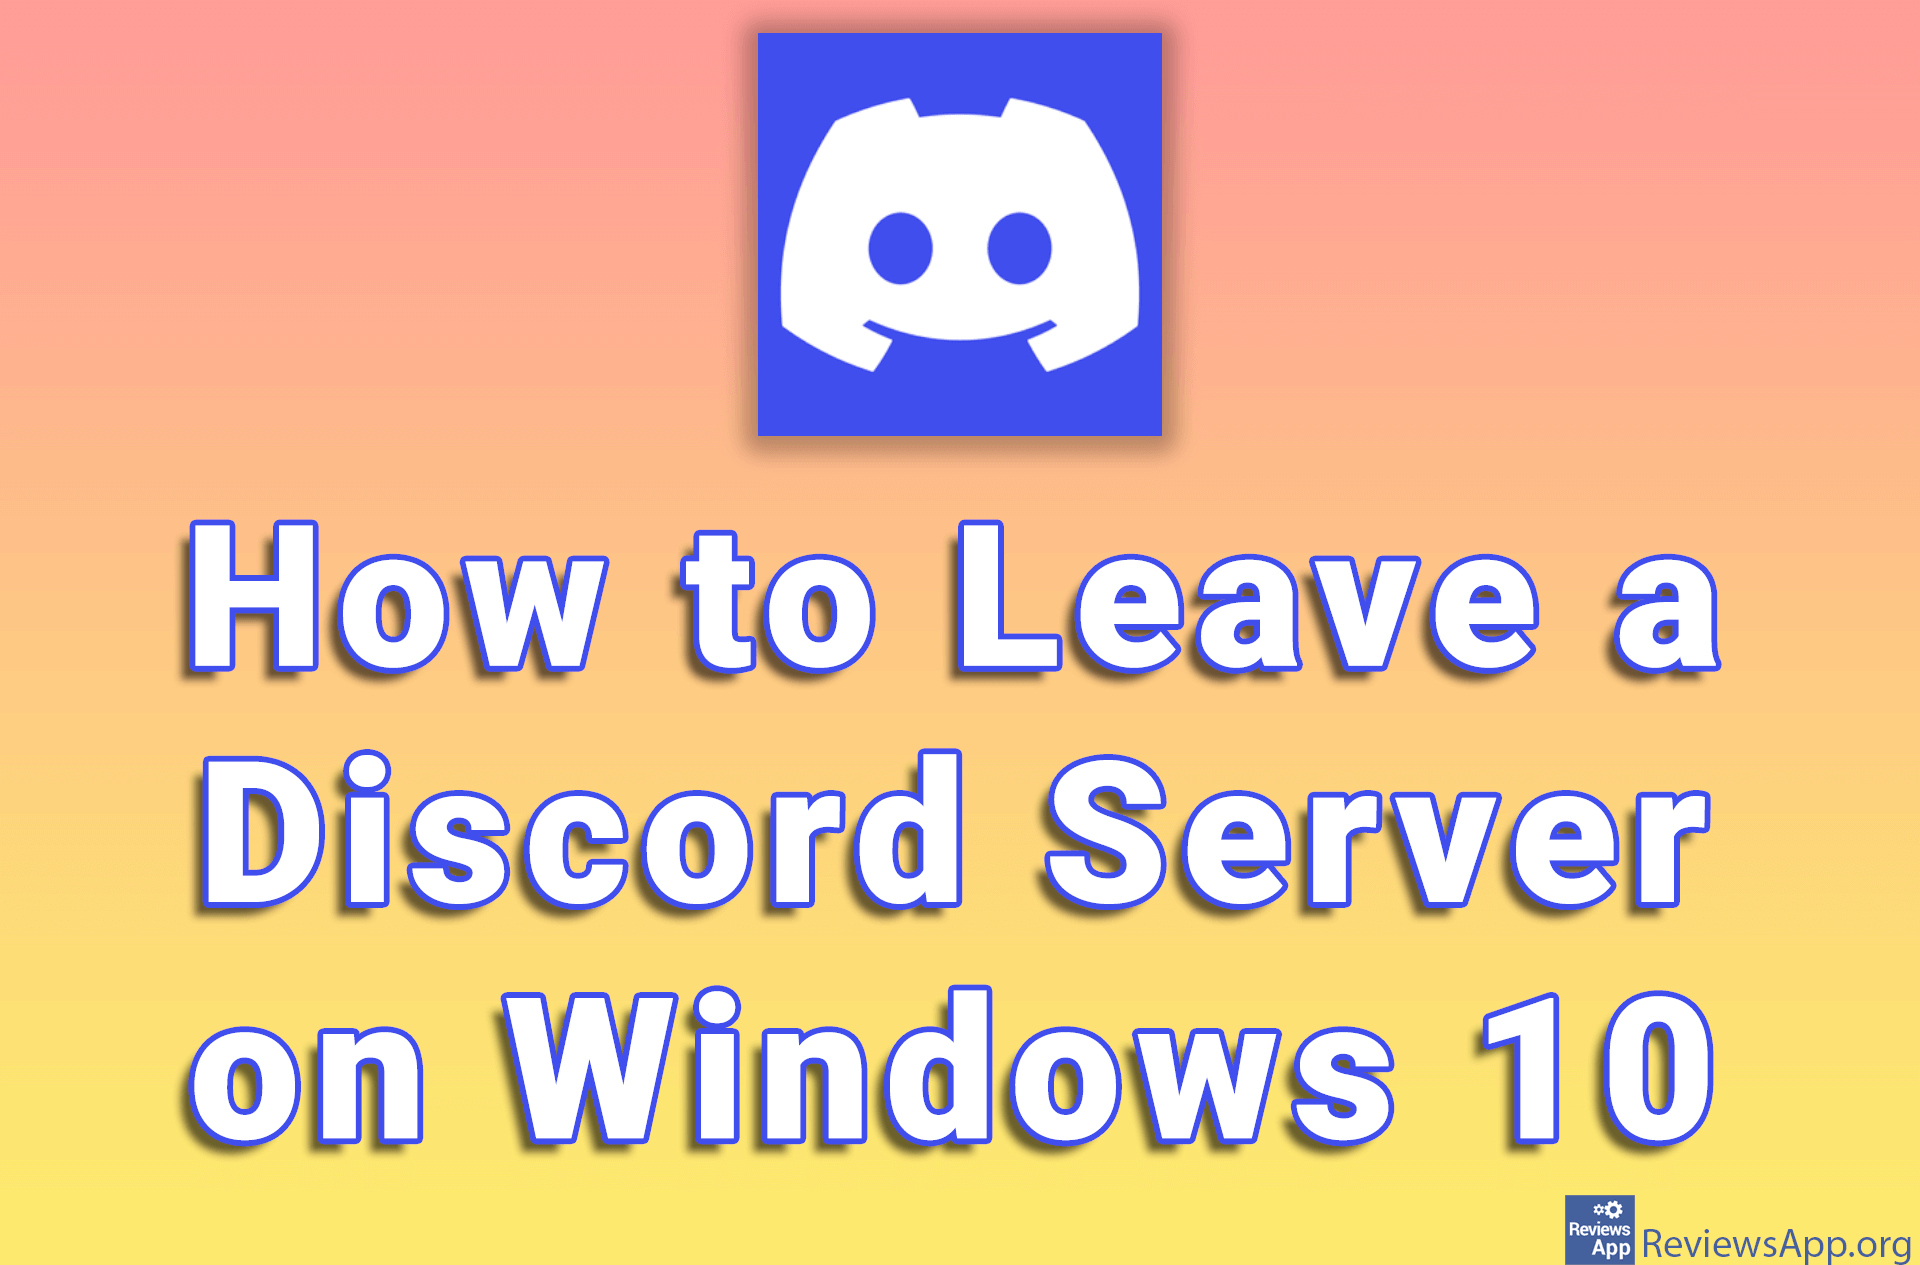 How to Leave a Discord Server on Windows 10